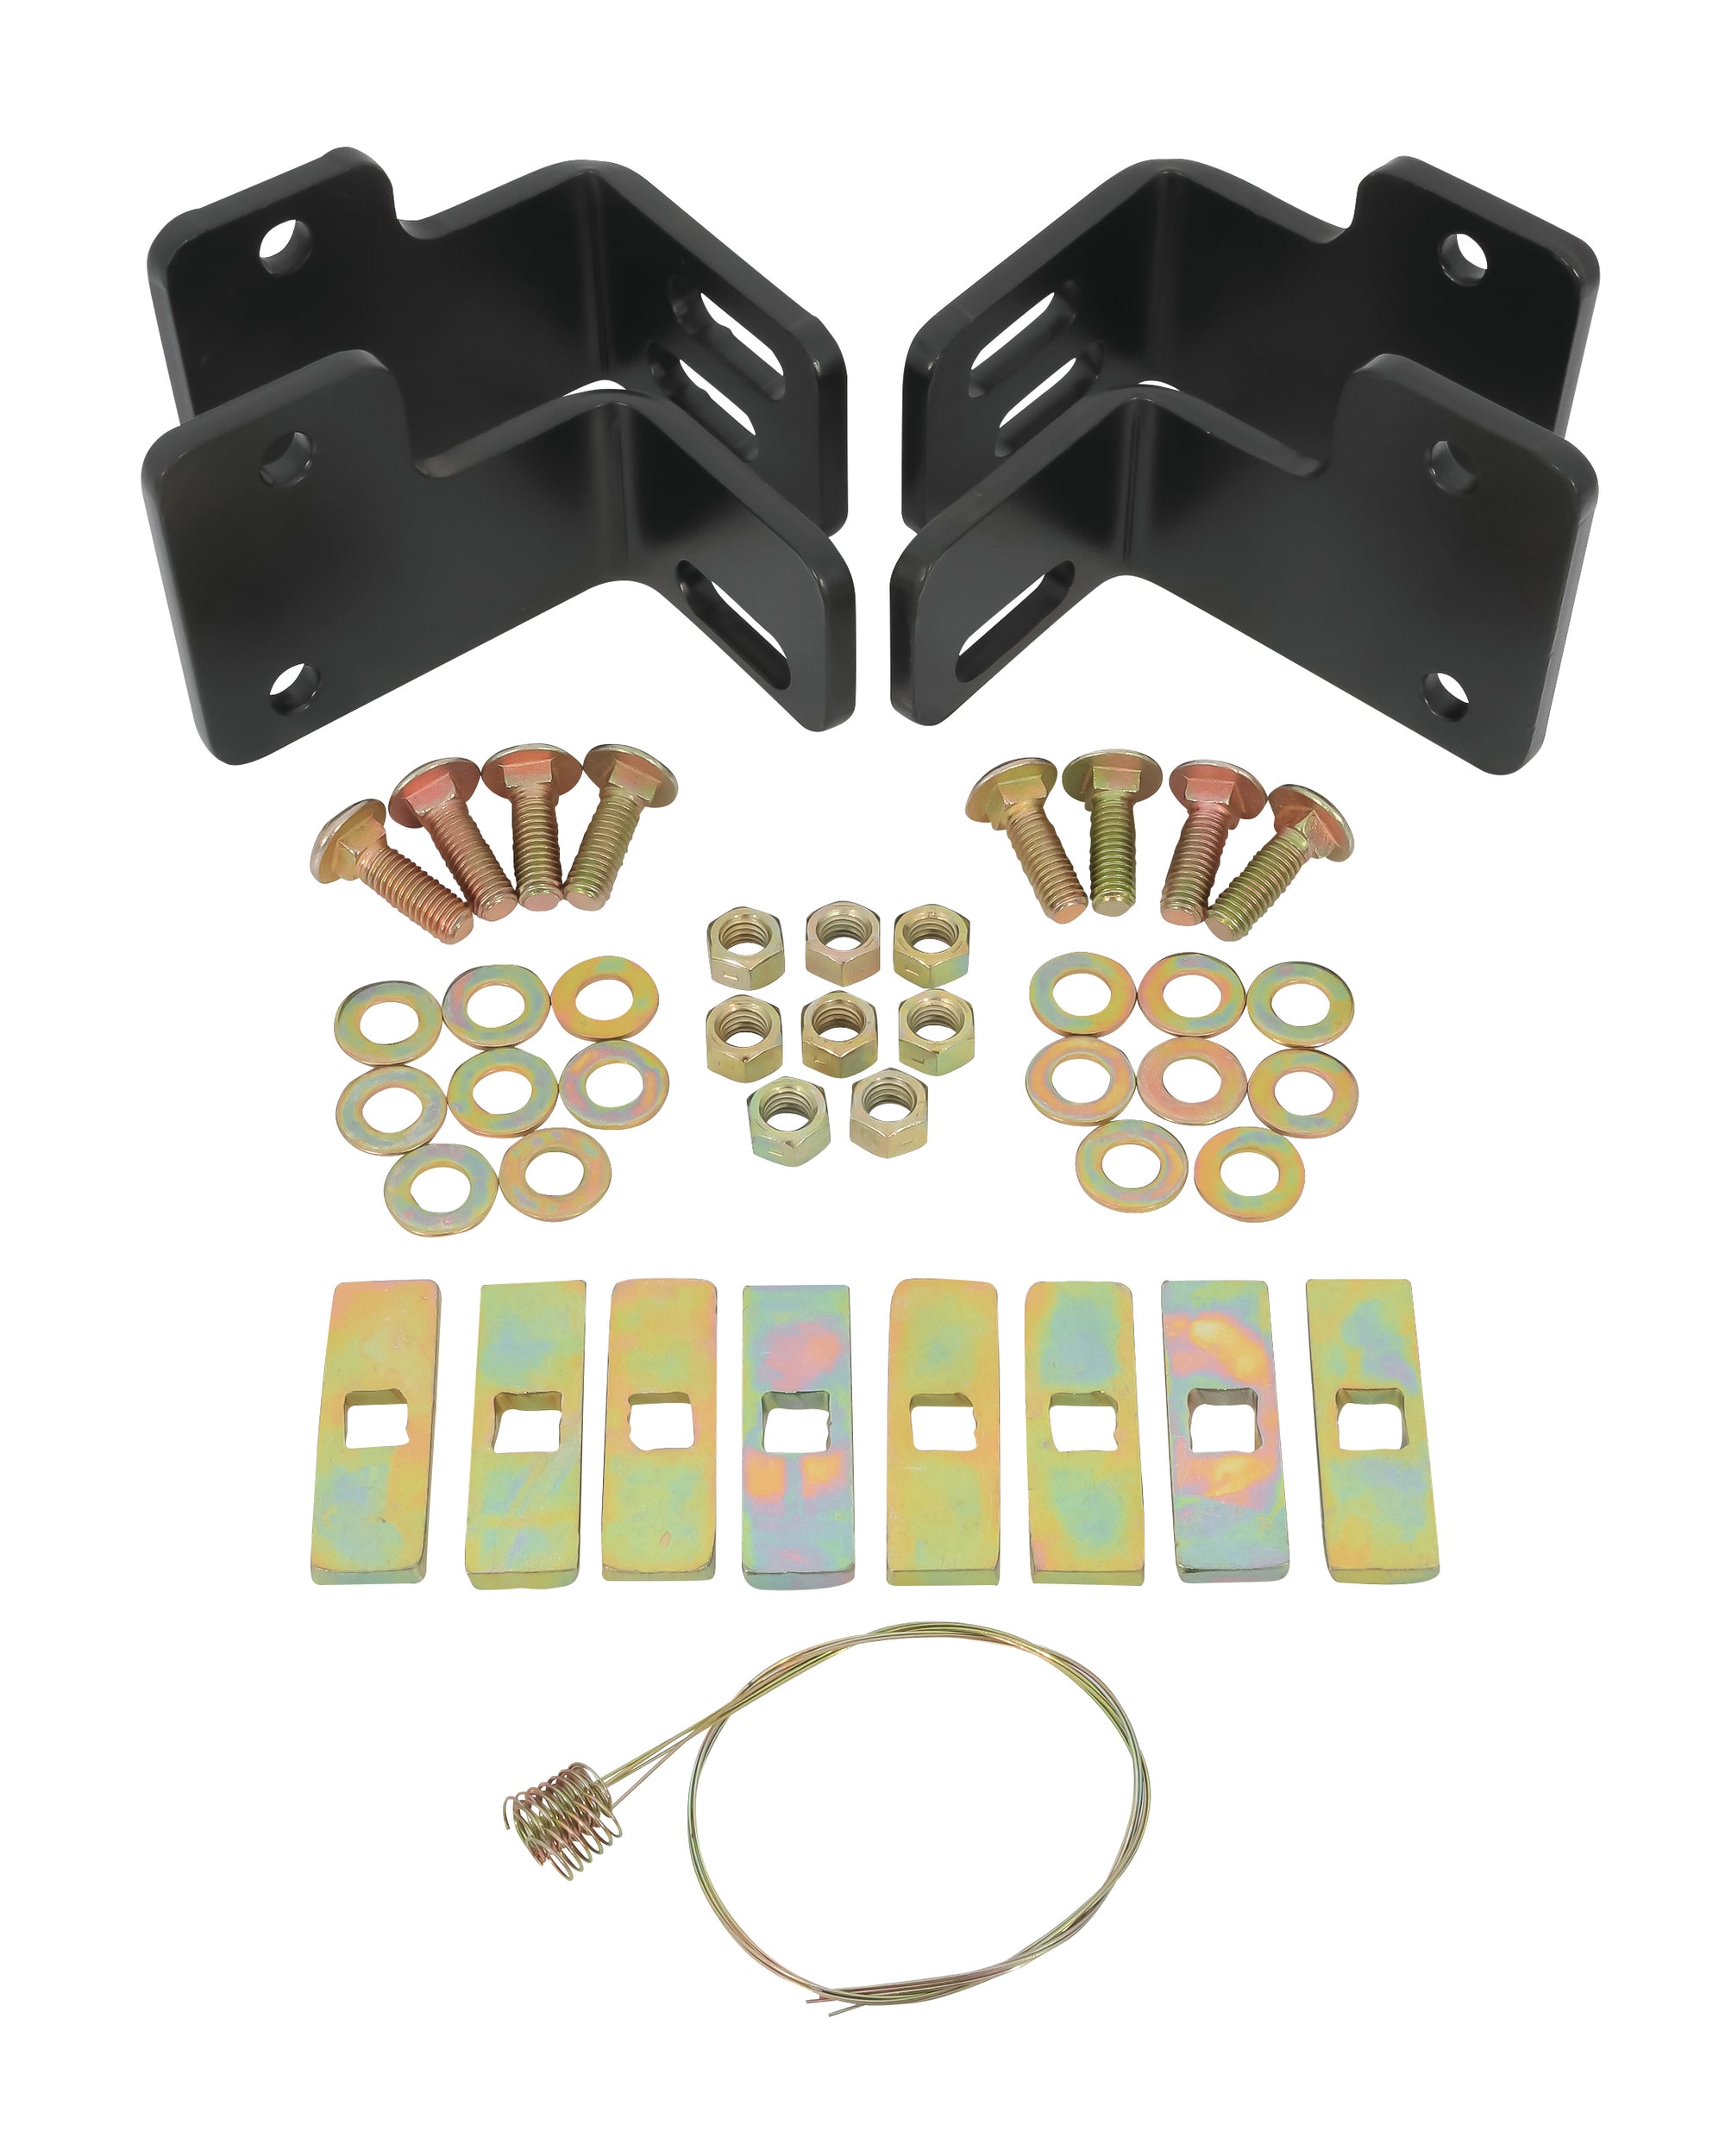 Camco 48593 5Th Wheel Adapter Kit Eazlift for Ford F150 '04-'14